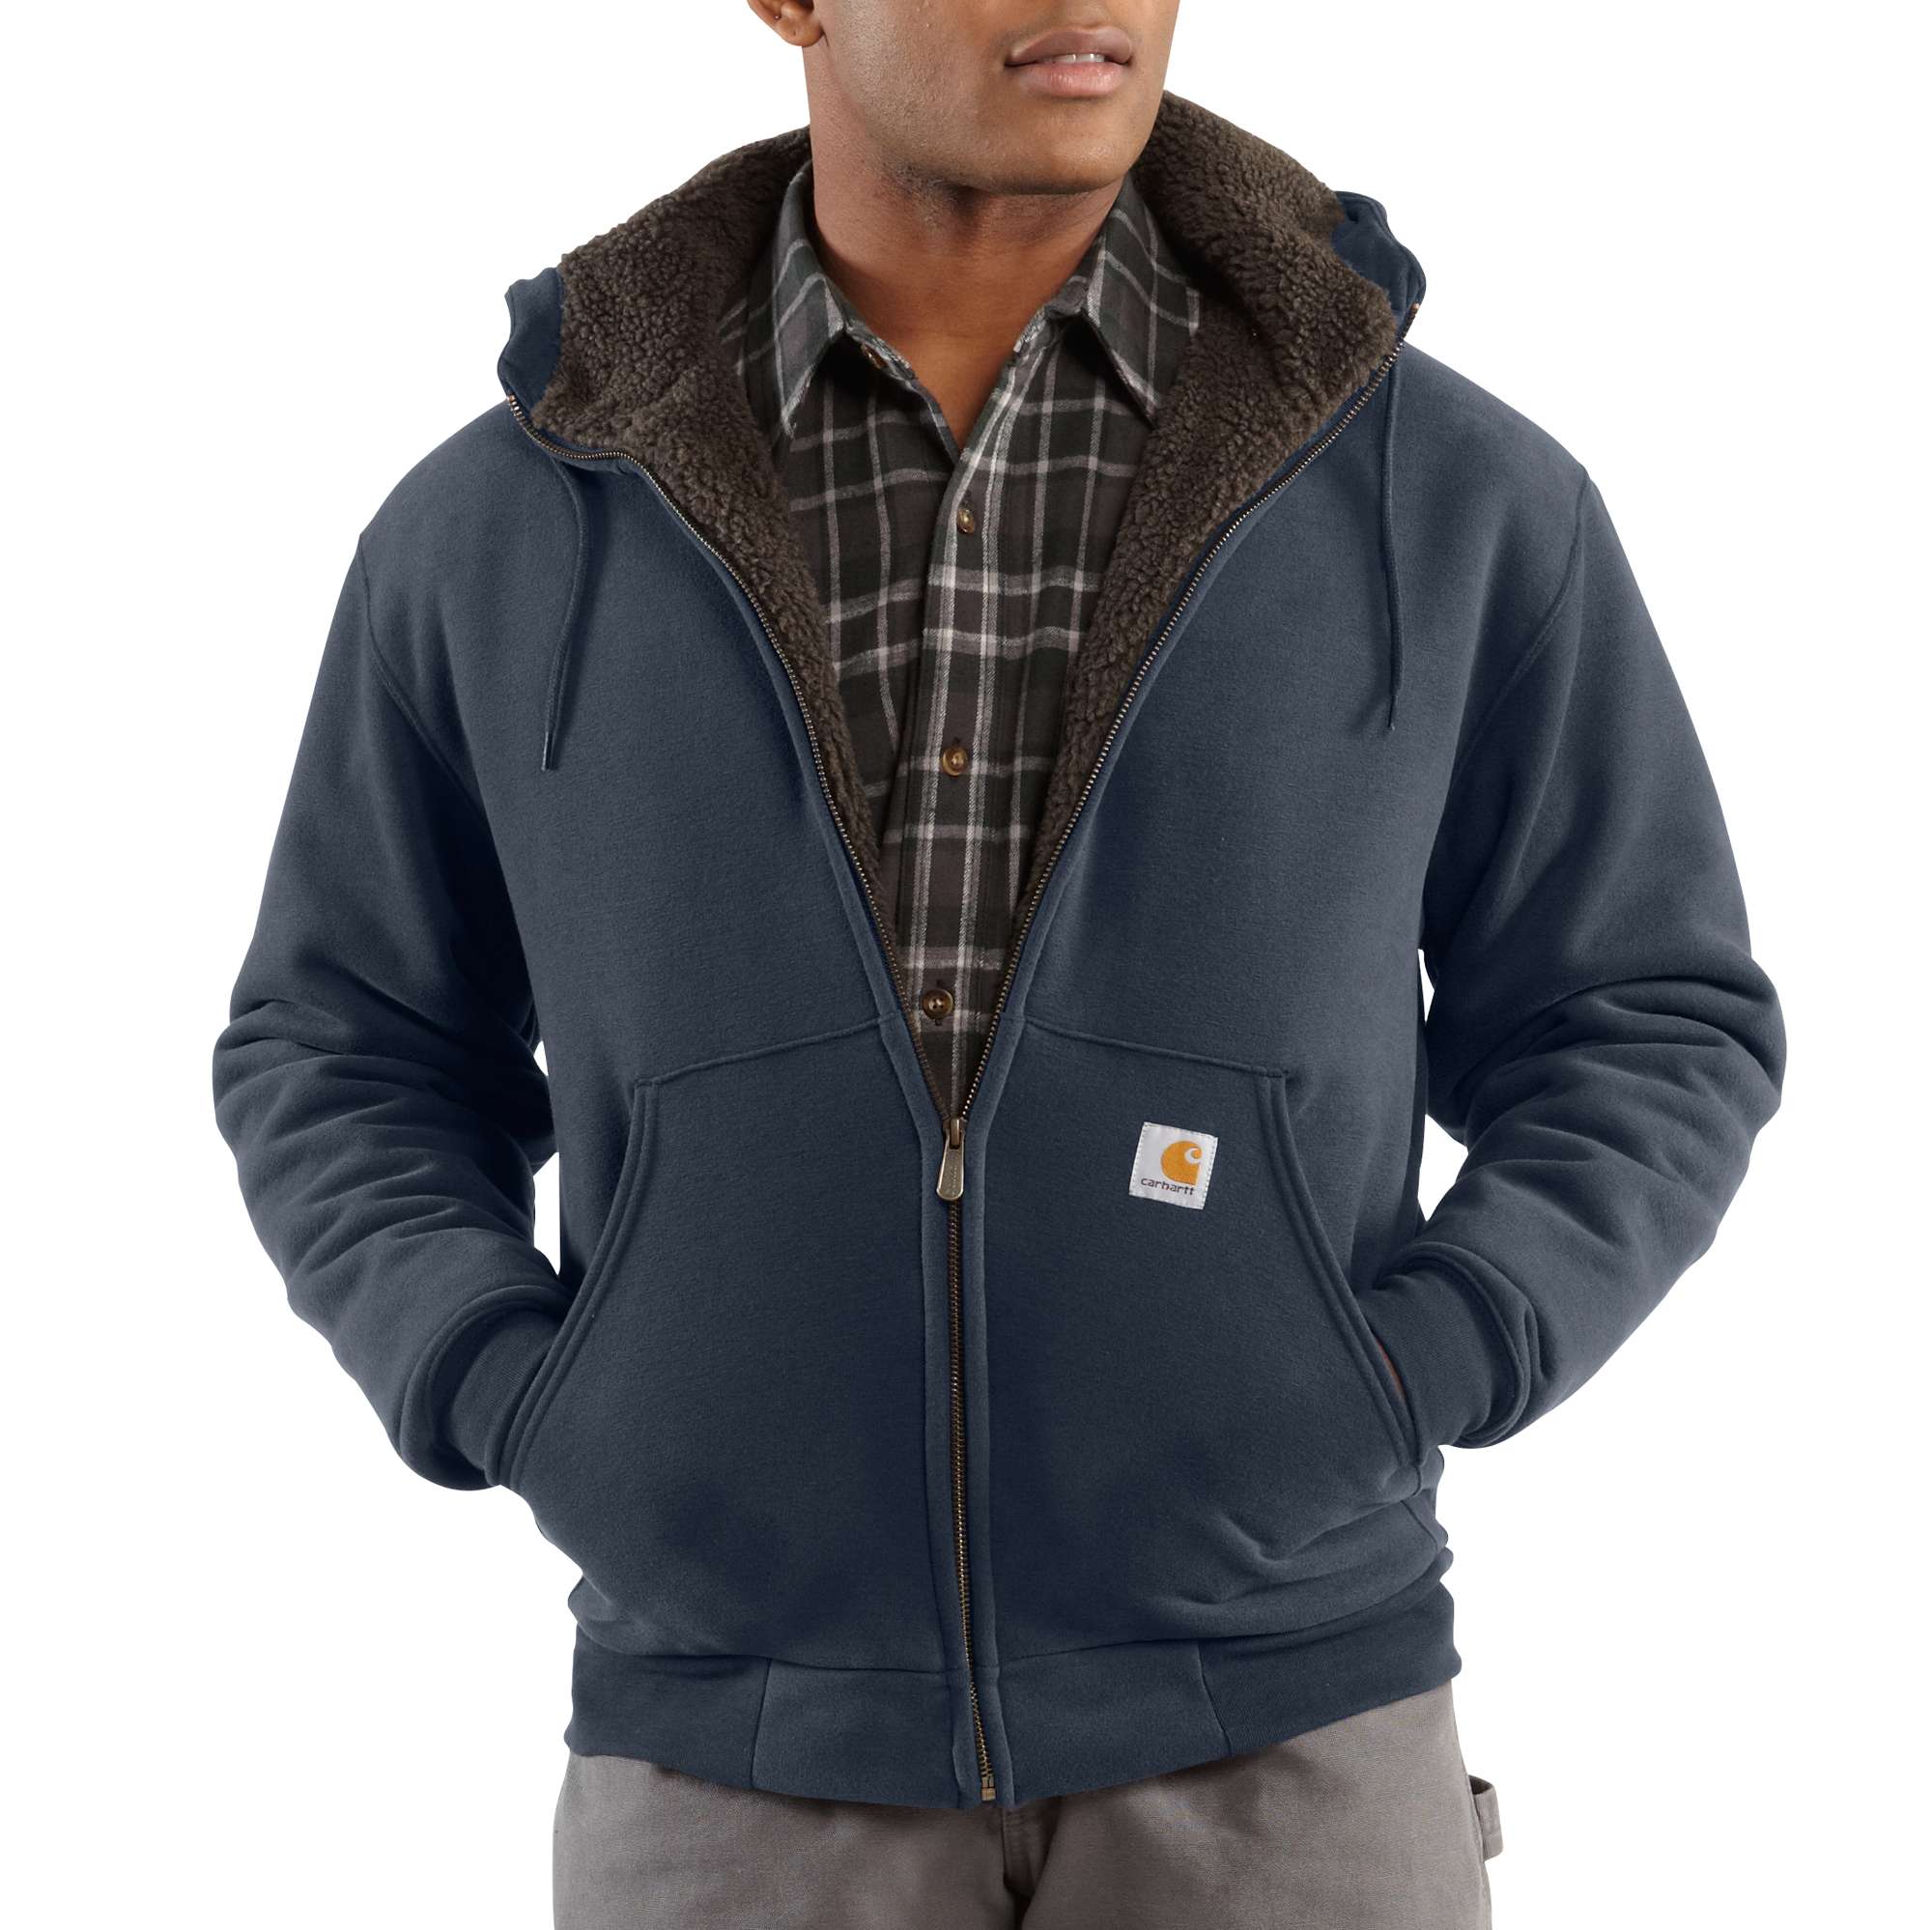 Carhartt – 25% Winter Clearance Sale! – Holiday Deals and More.com